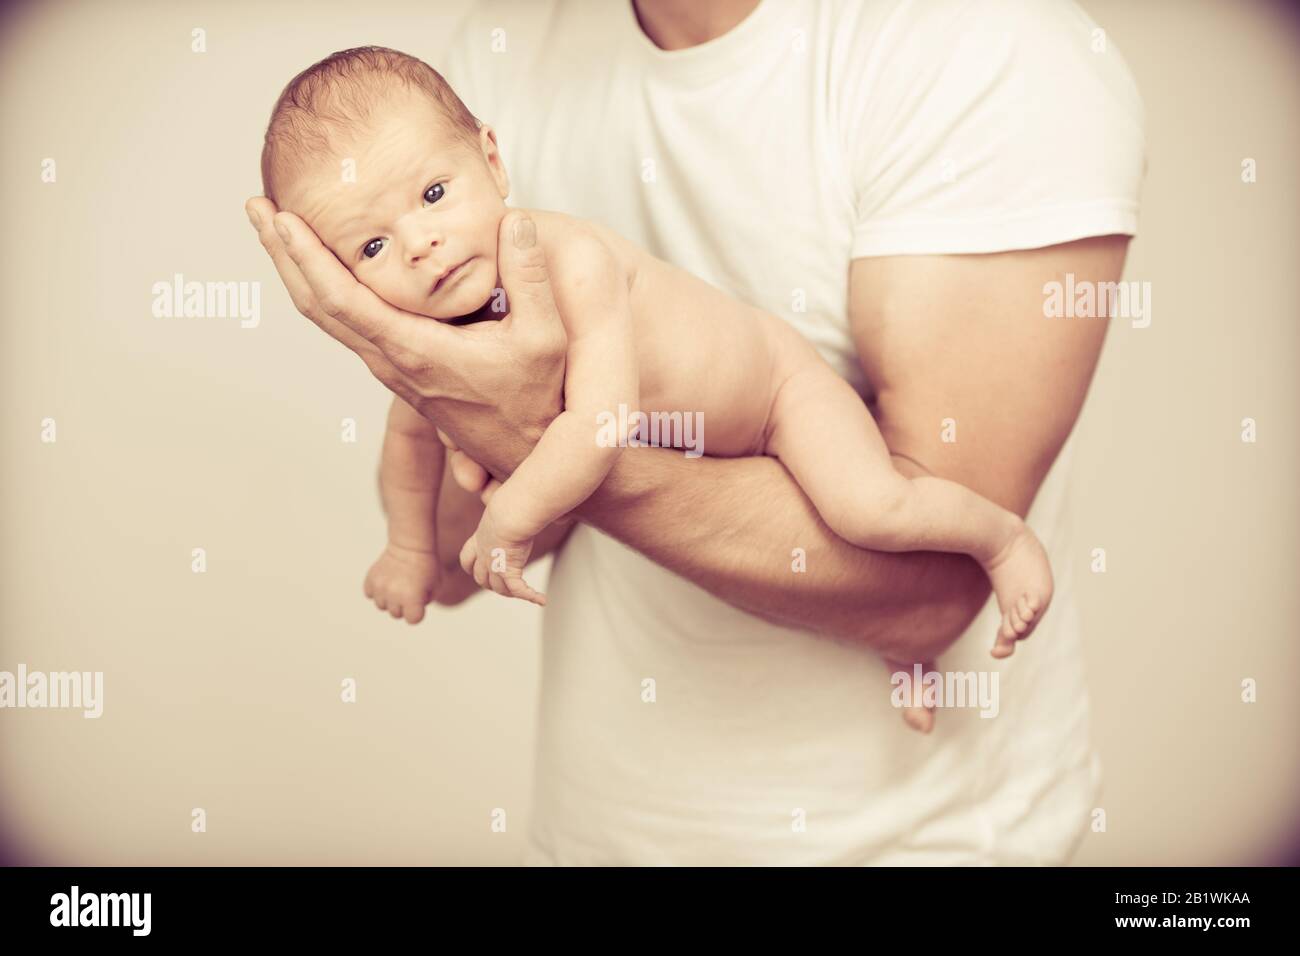 Father holding new born baby on his arm Stock Photo